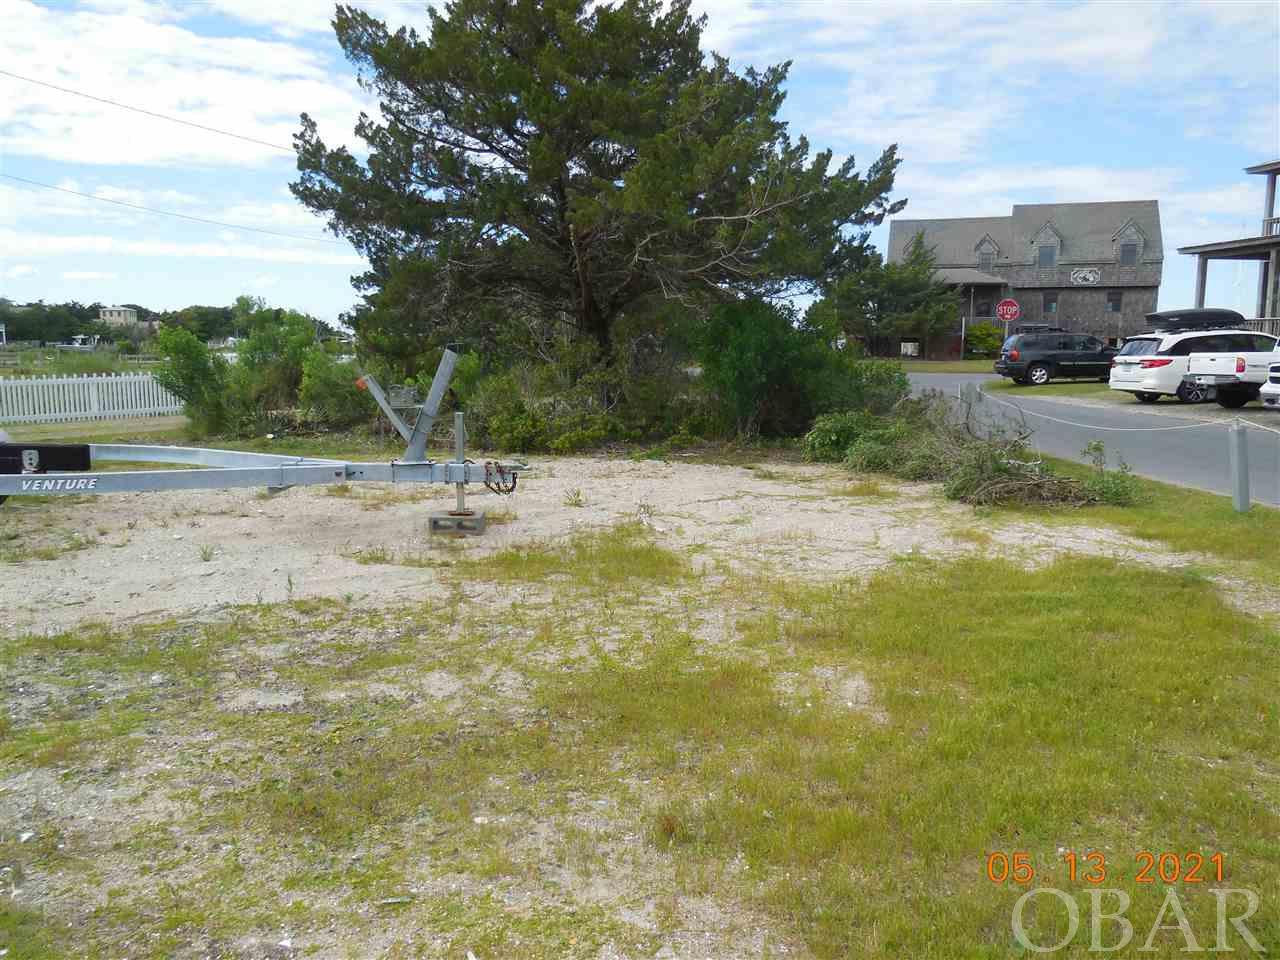 A 6600 sq. ft. lot located on Creek Road across the street from Silver Lake! An installed 4 bedroom septic system and 3 bedroom/2 bath water meter convey with the sale. With the new height restrictions on Ocracoke, a reversed plan home built on this property, has the potential for Pamlico Sound, the Ocracoke Lighthouse and Silver Lake views. Beautiful sunsets! Charming island setting. Cleared and ready to build!.